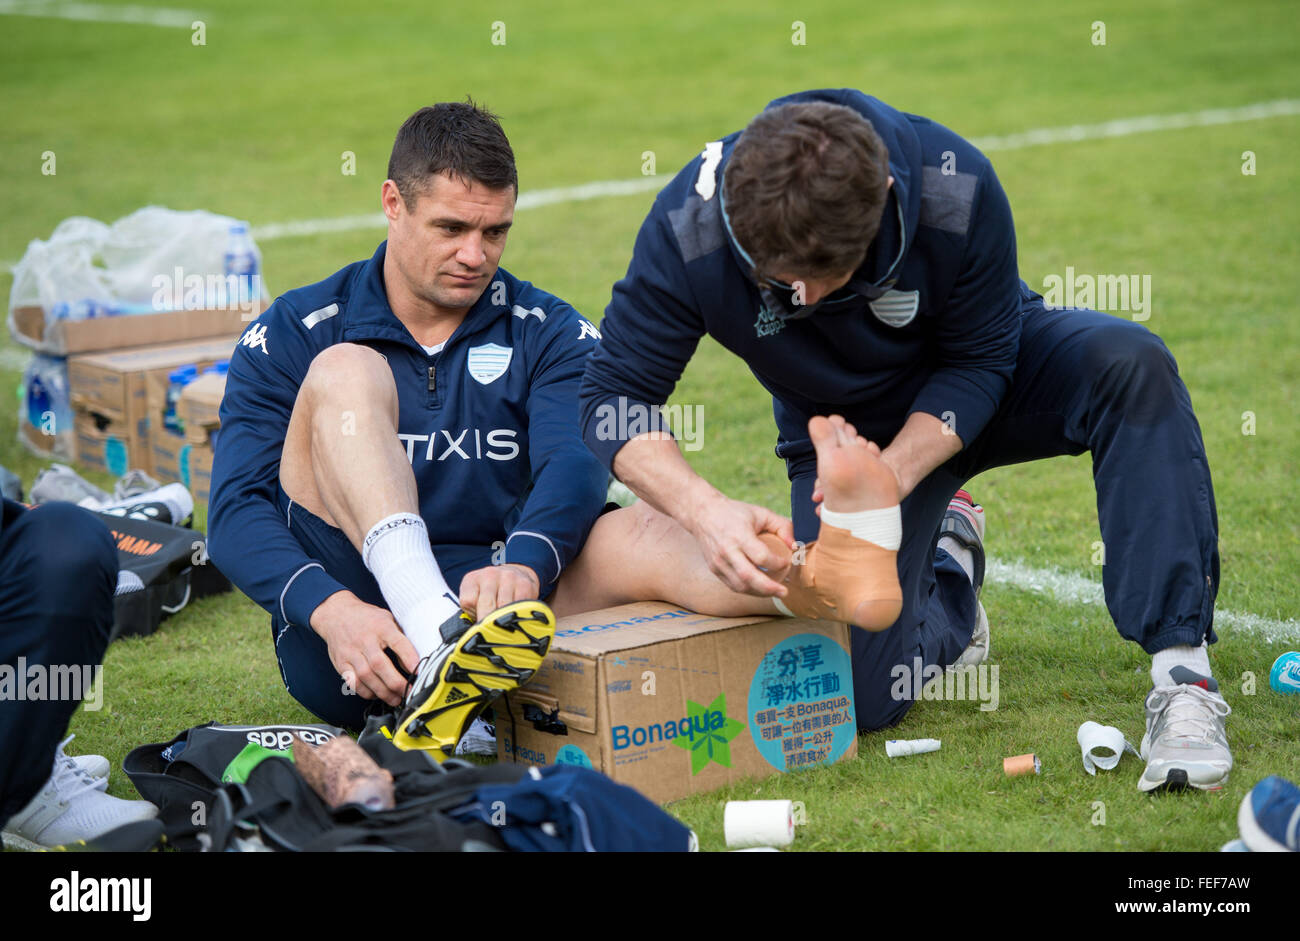 Feb. 5, 2016 - Hong Kong, Hong Kong S.A.R, China - DAN CARTER of the French Rugby union team RACING  92's gets strapped for the last practice session ahead of their clash with New Zealand team, The Highlanders. Racing 92 take the chance to practise on the pitch they will play on in the upcoming match in Hong Kong. They are playing at Sui Sai Wan sports ground in Chai Wan. (Credit Image: © Jayne Russell via ZUMA Wire) Stock Photo